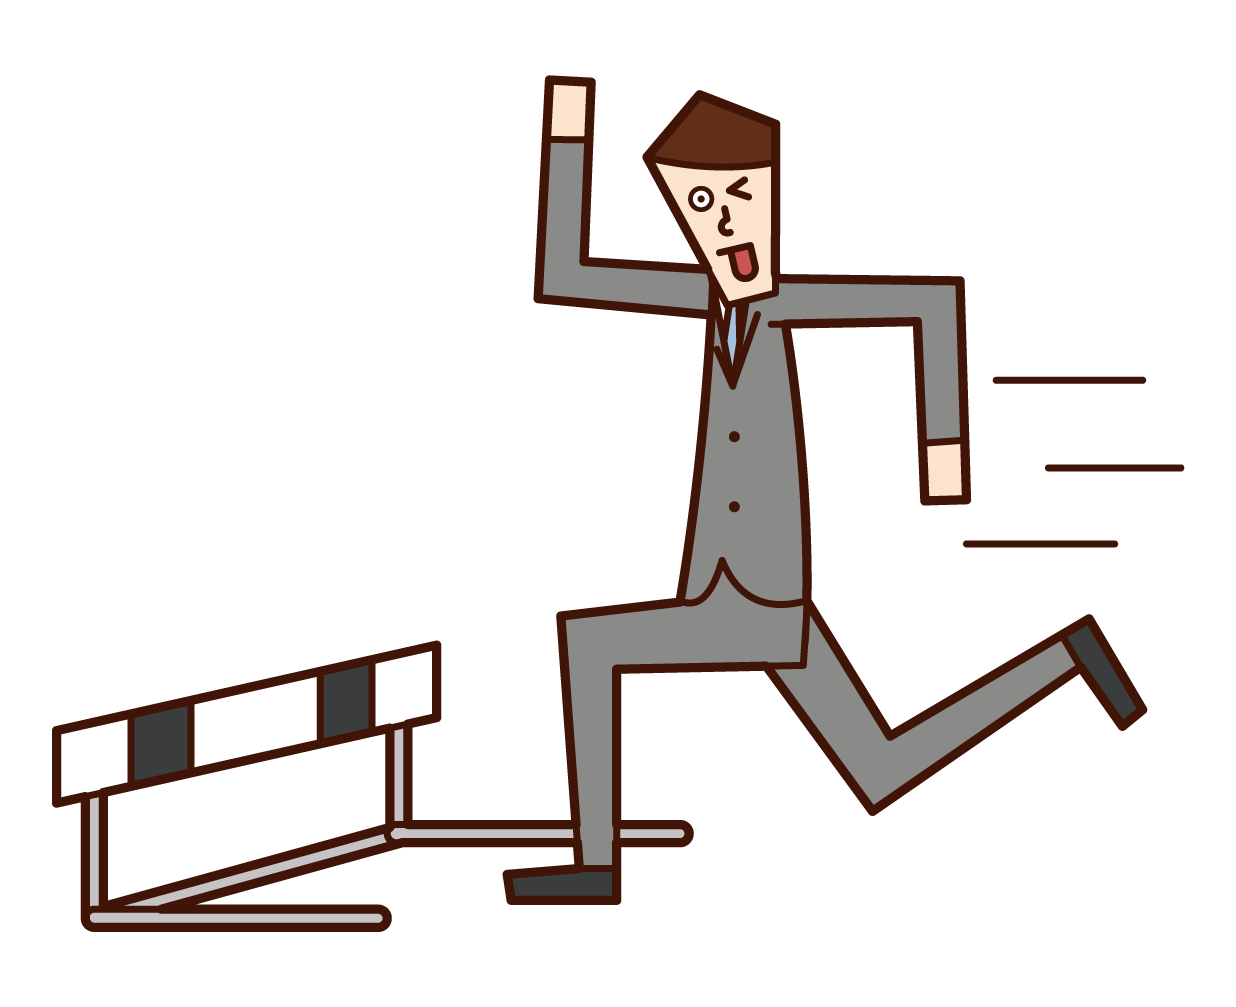 Illustration of a man jumping over a low hurdle